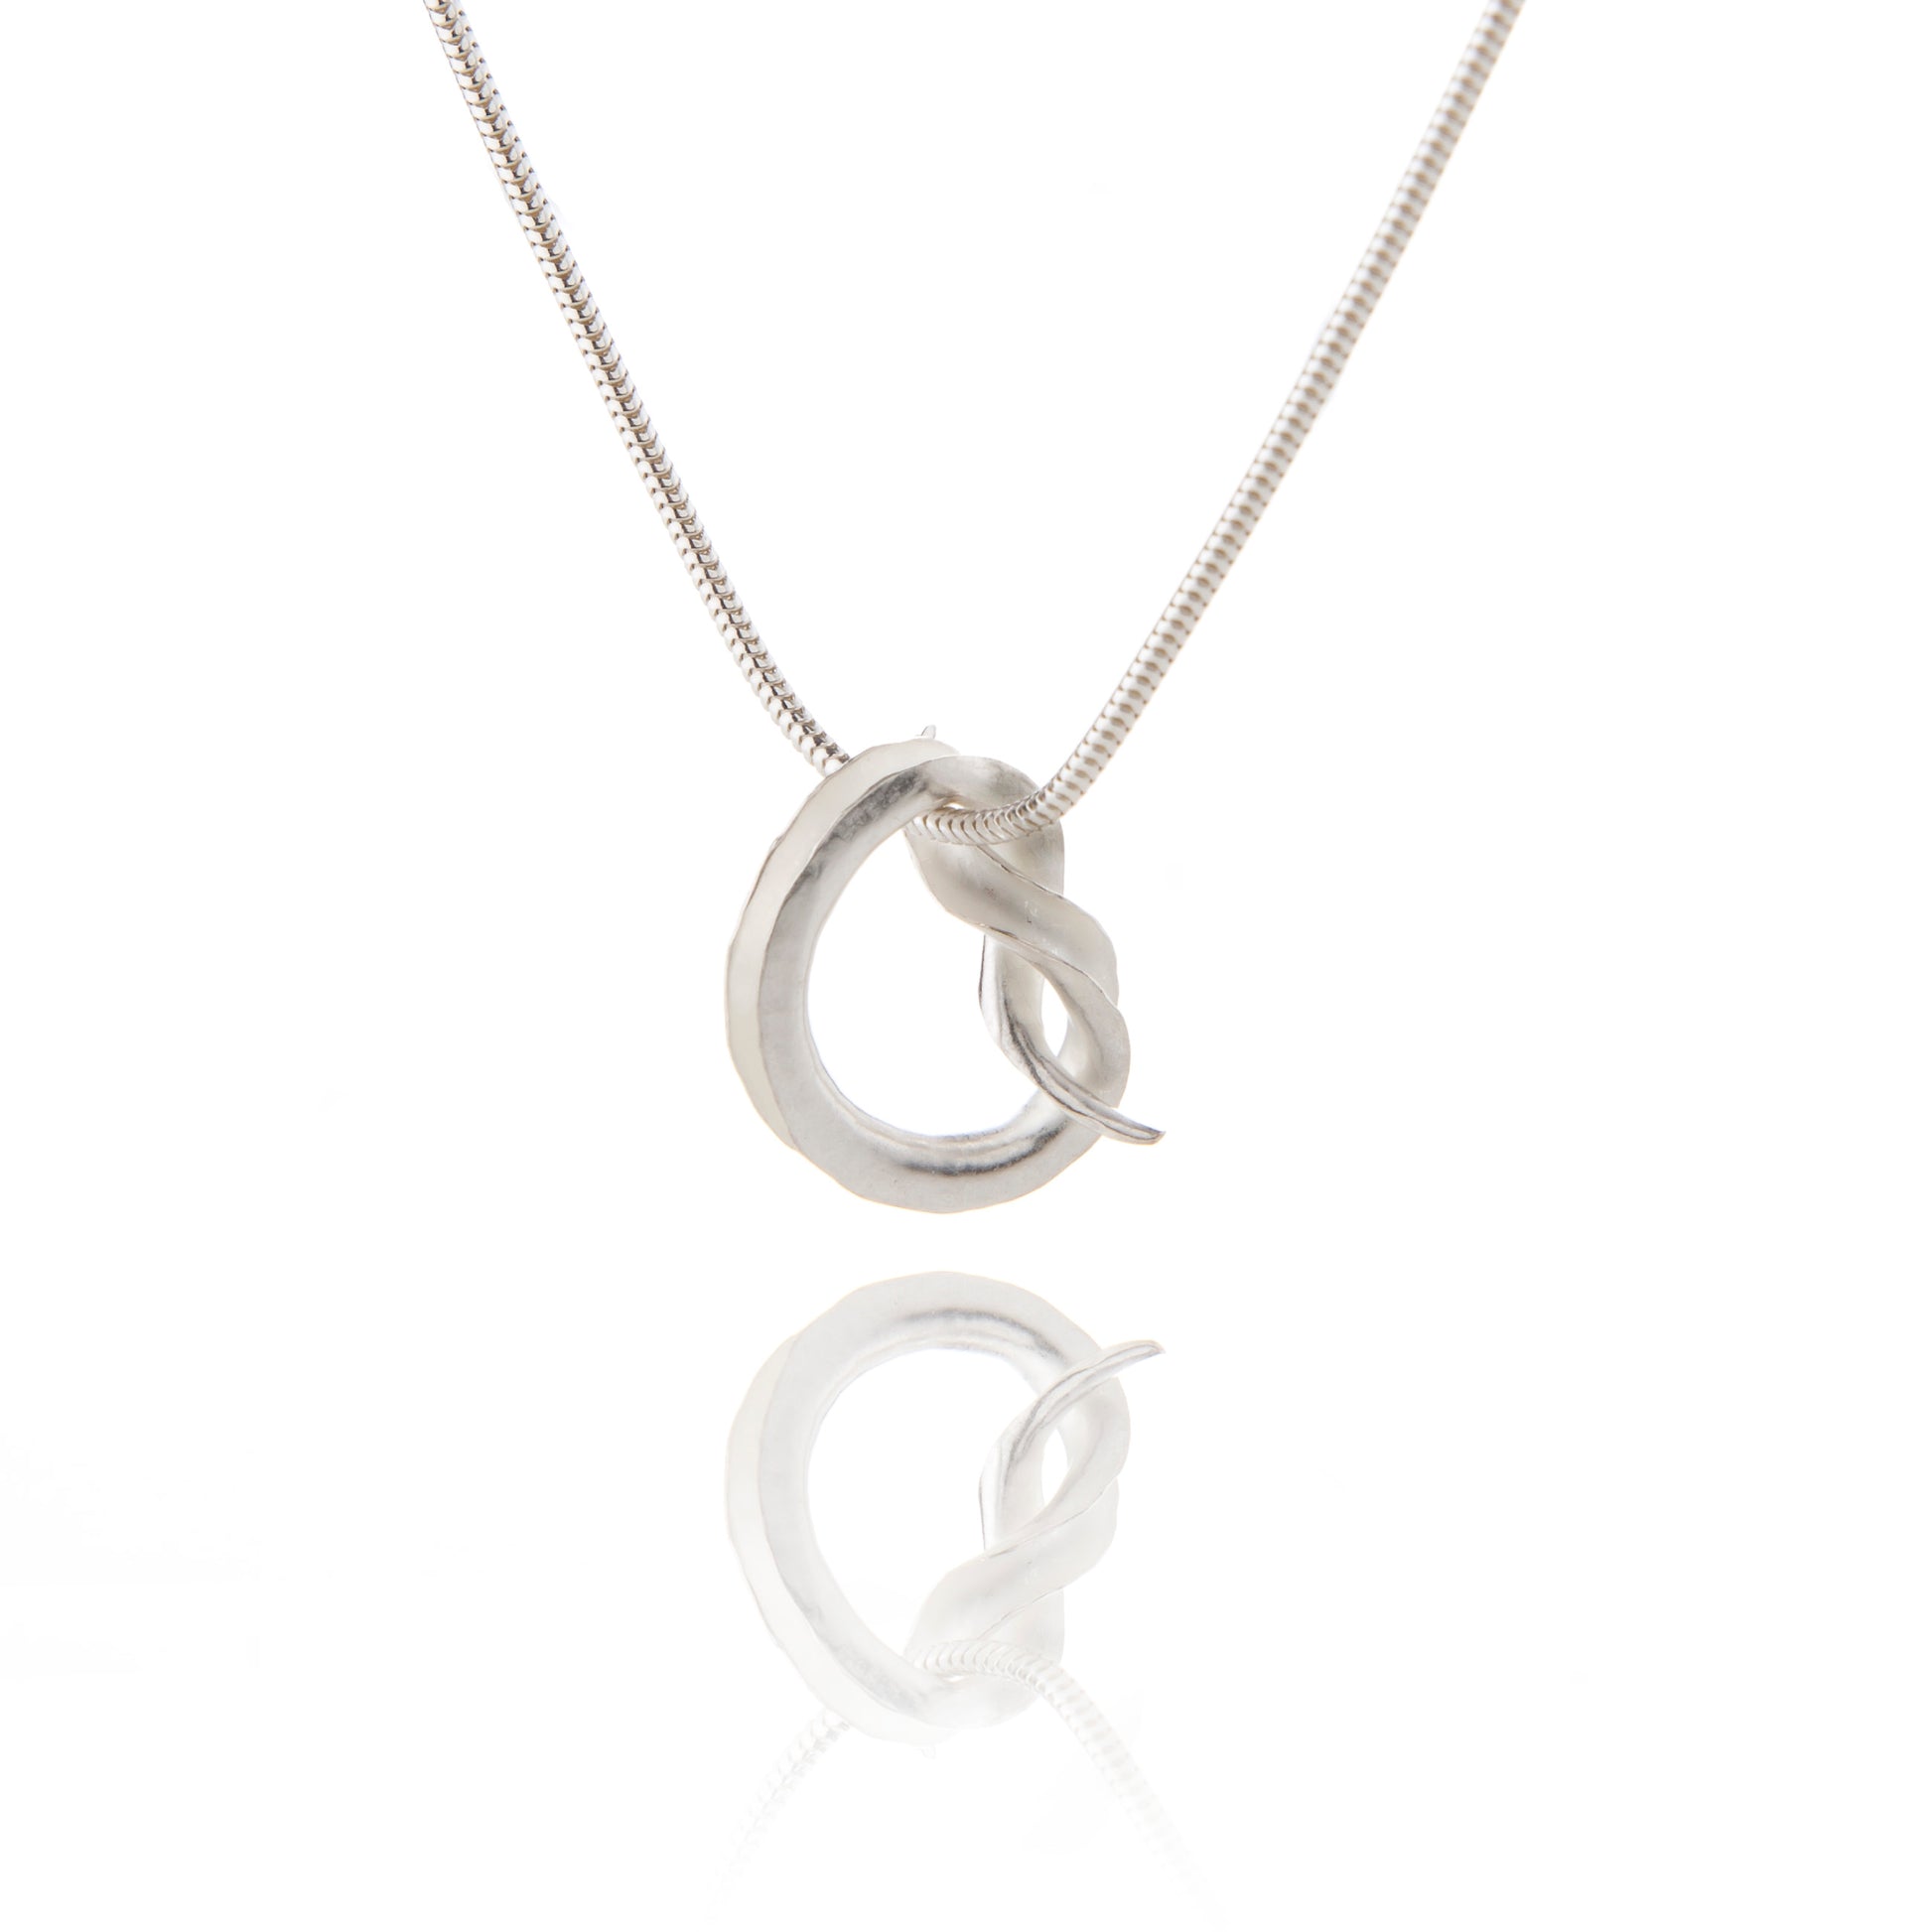 A silver pendant in the shape of a knot, in the form of a tube open down one side, hanging from a silver snake chain.